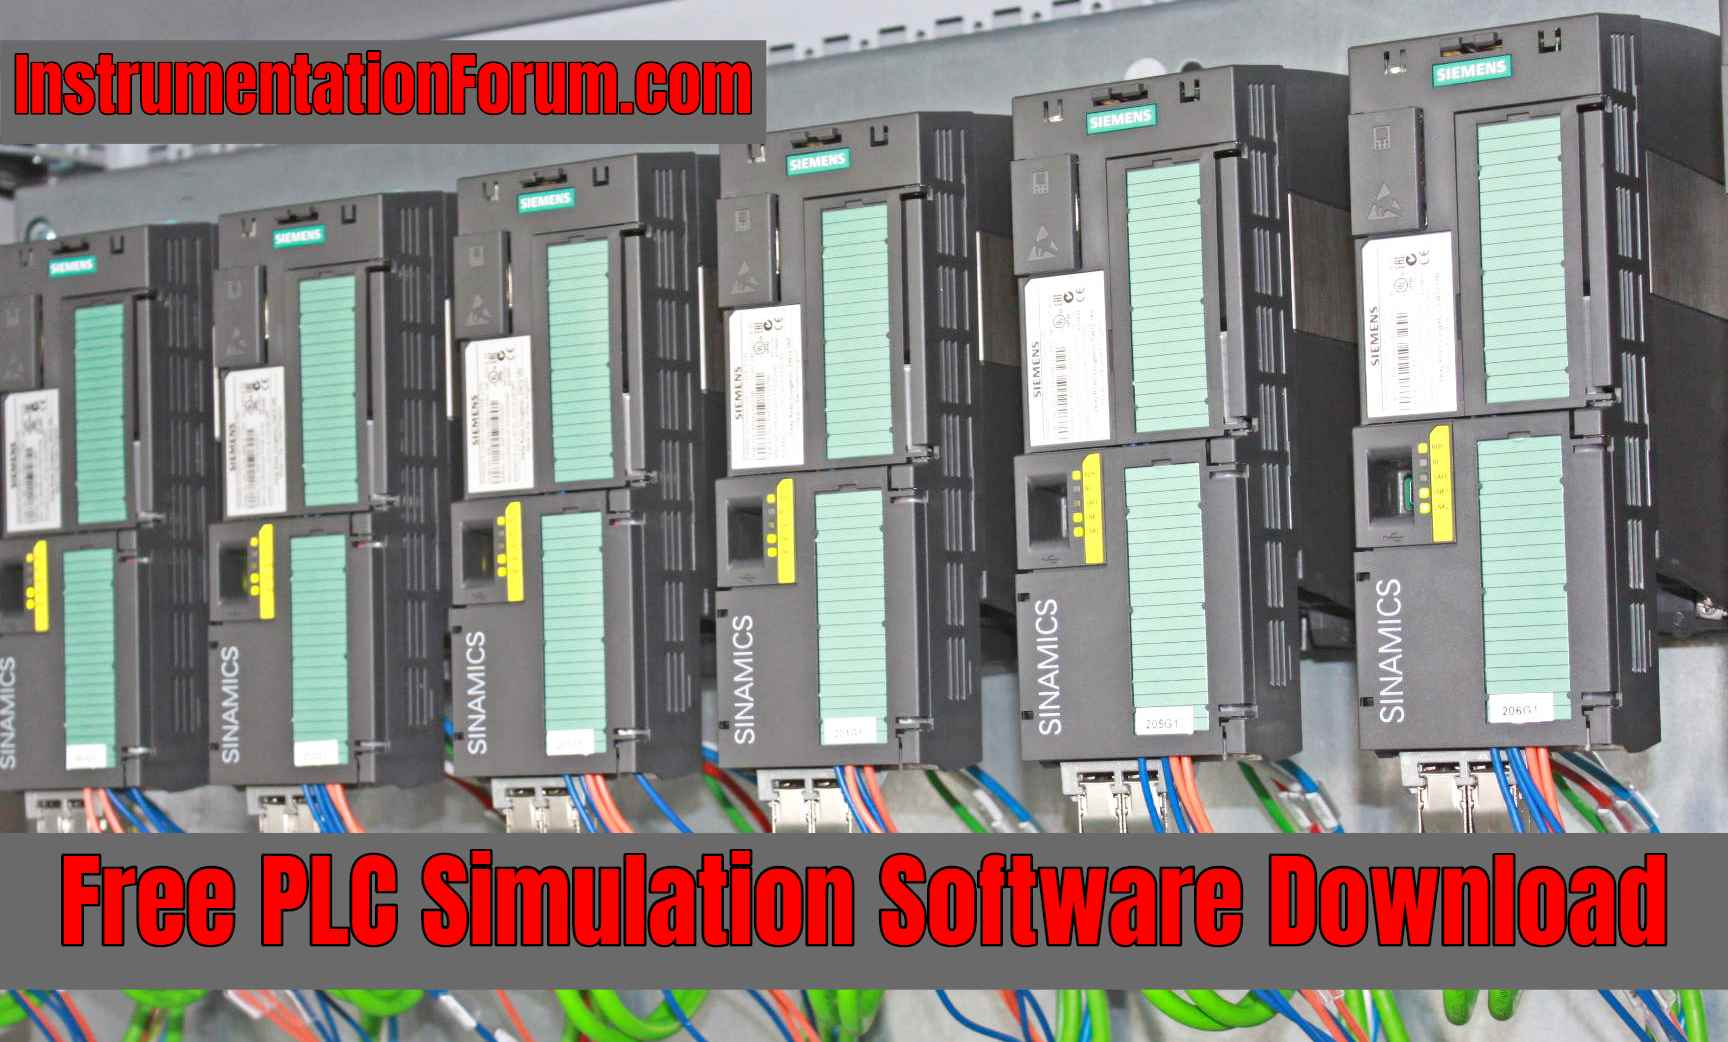 pic simulation software free download